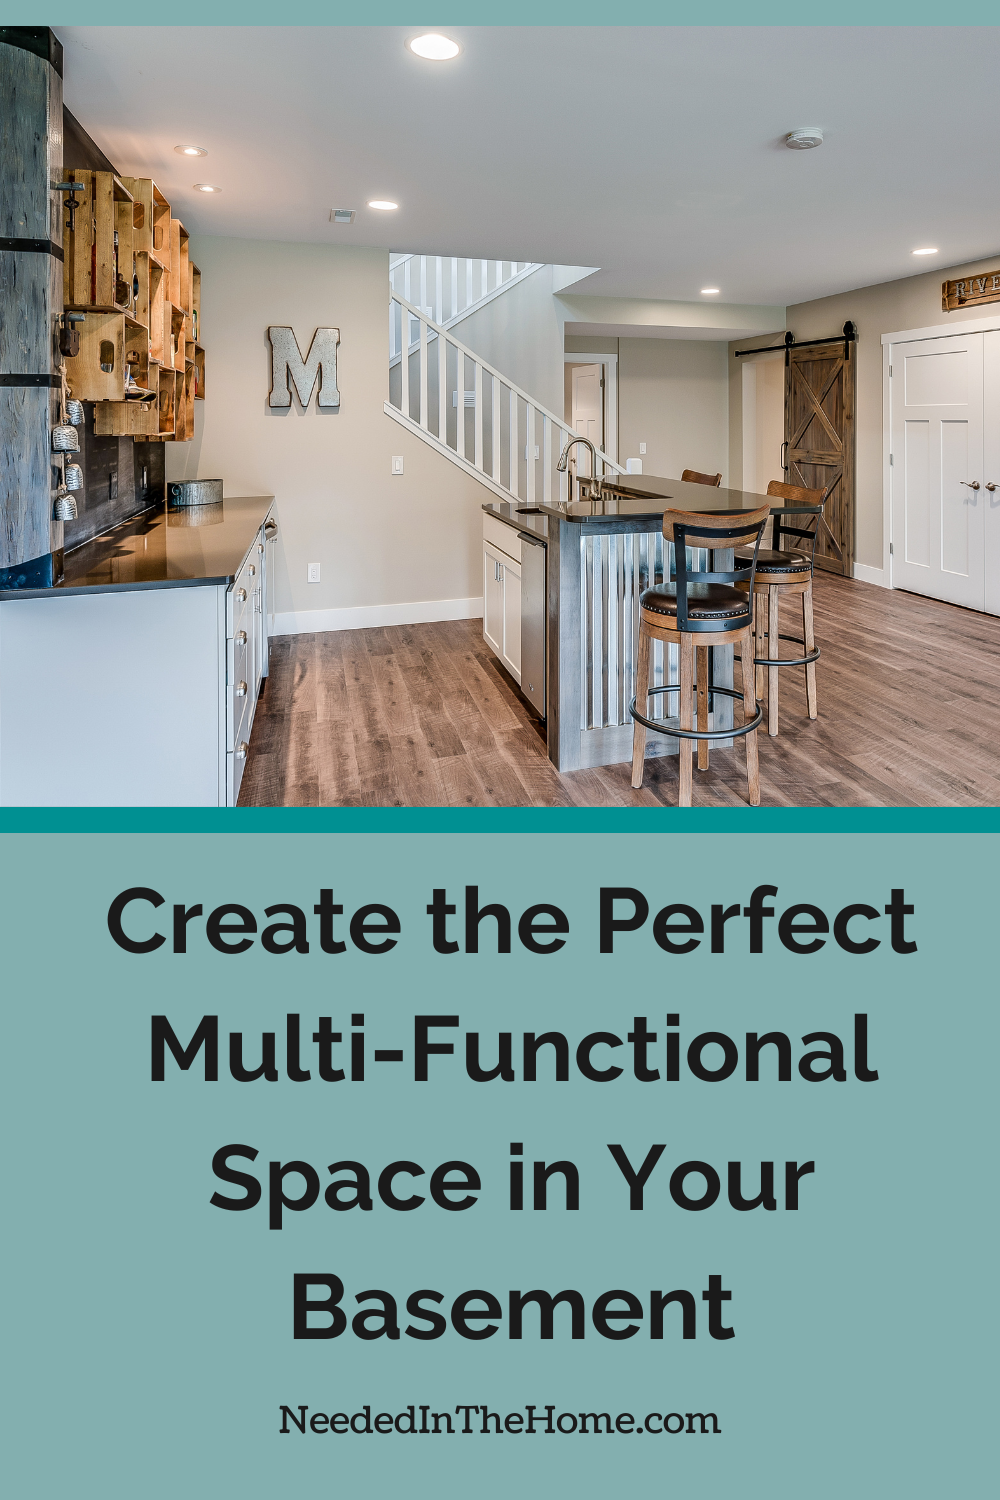 basement family room with wood floors counter bar sink cupboards storage closet sliding barn door create the perfect multi functional space in your basement neededinthehome